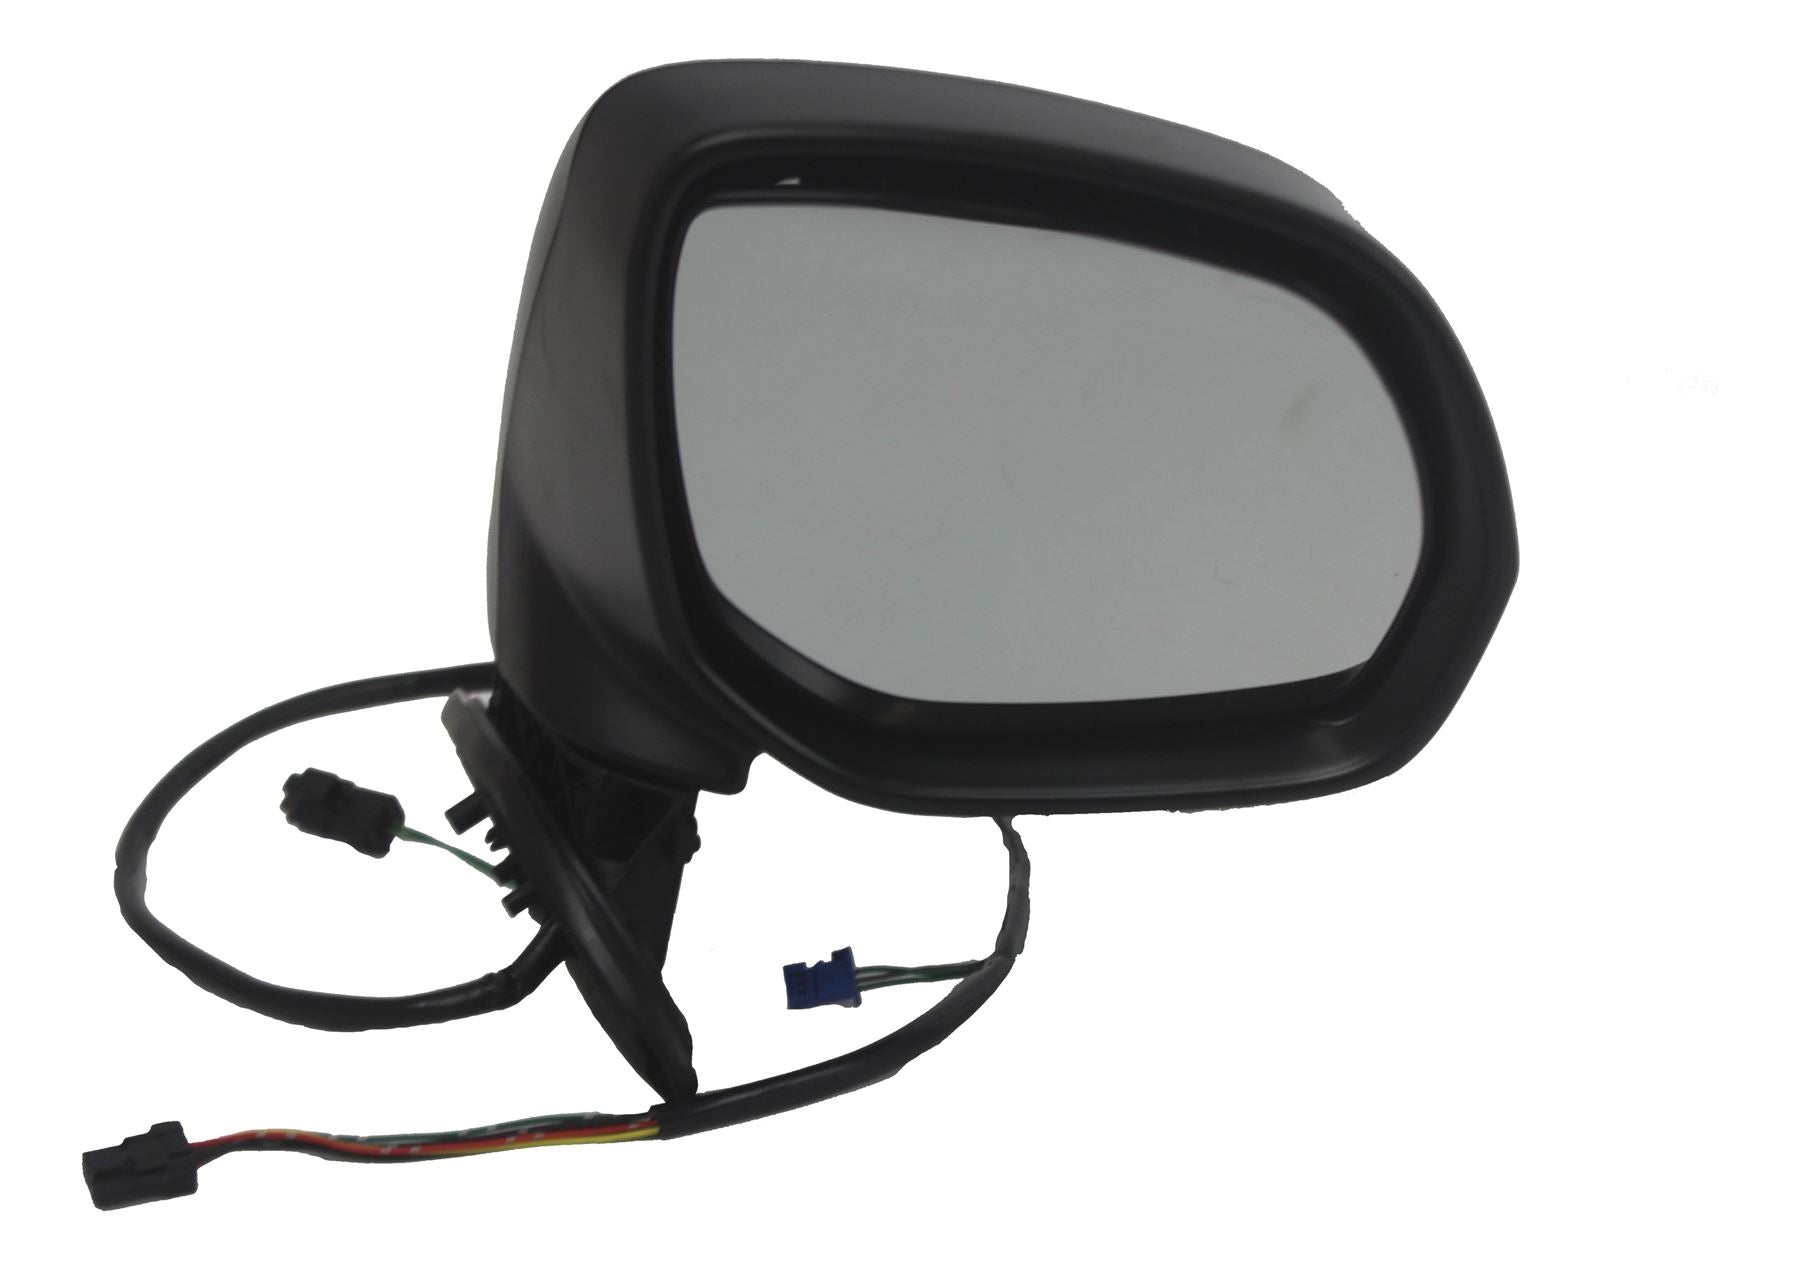 Citroen C4 Grand Picasso 06-13 Electric Wing Mirror Indicator Black Drivers Side